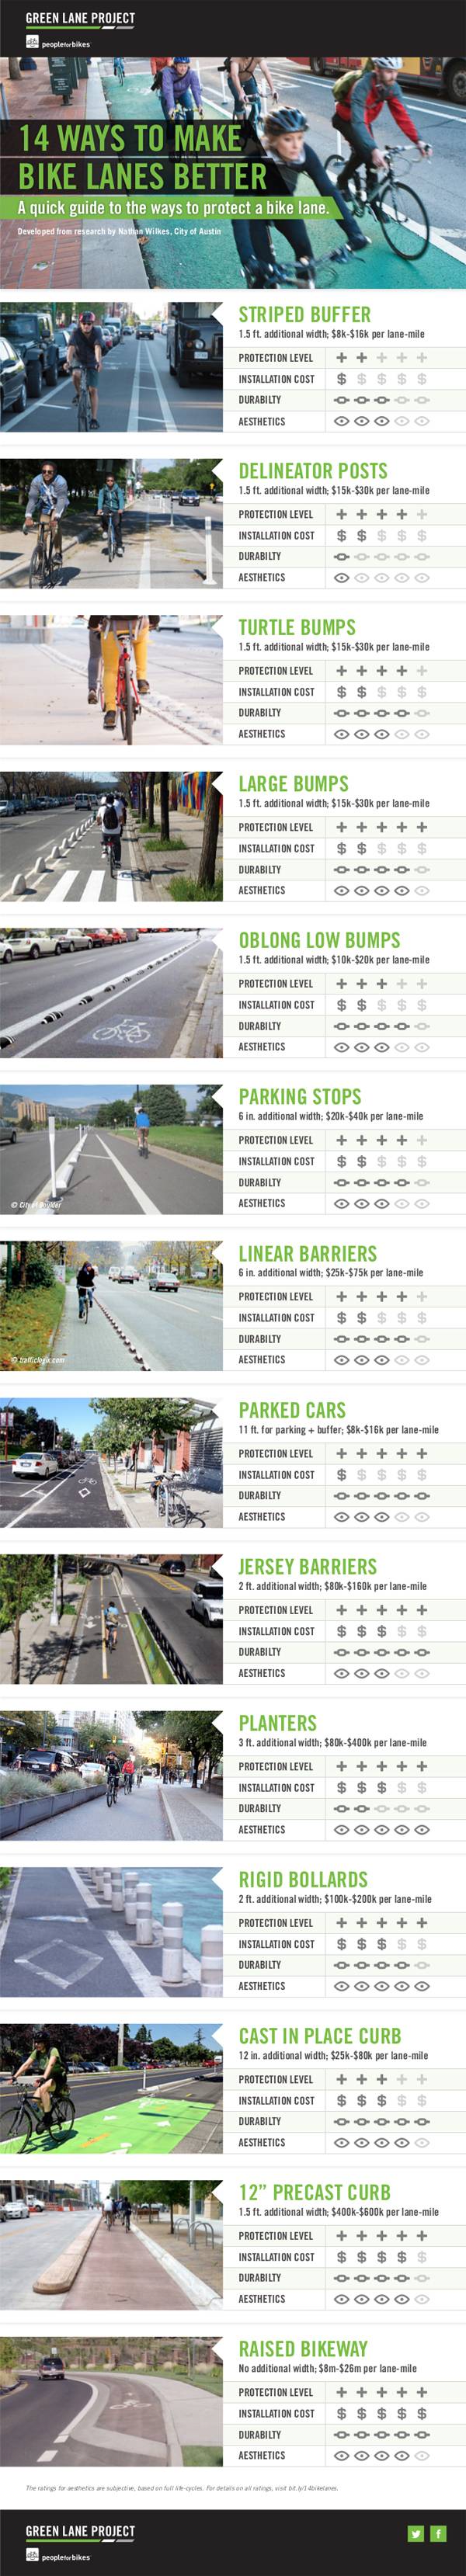 14 WAYS TO MAKE BIKE LANES BETTER (THE INFOGRAPHIC)